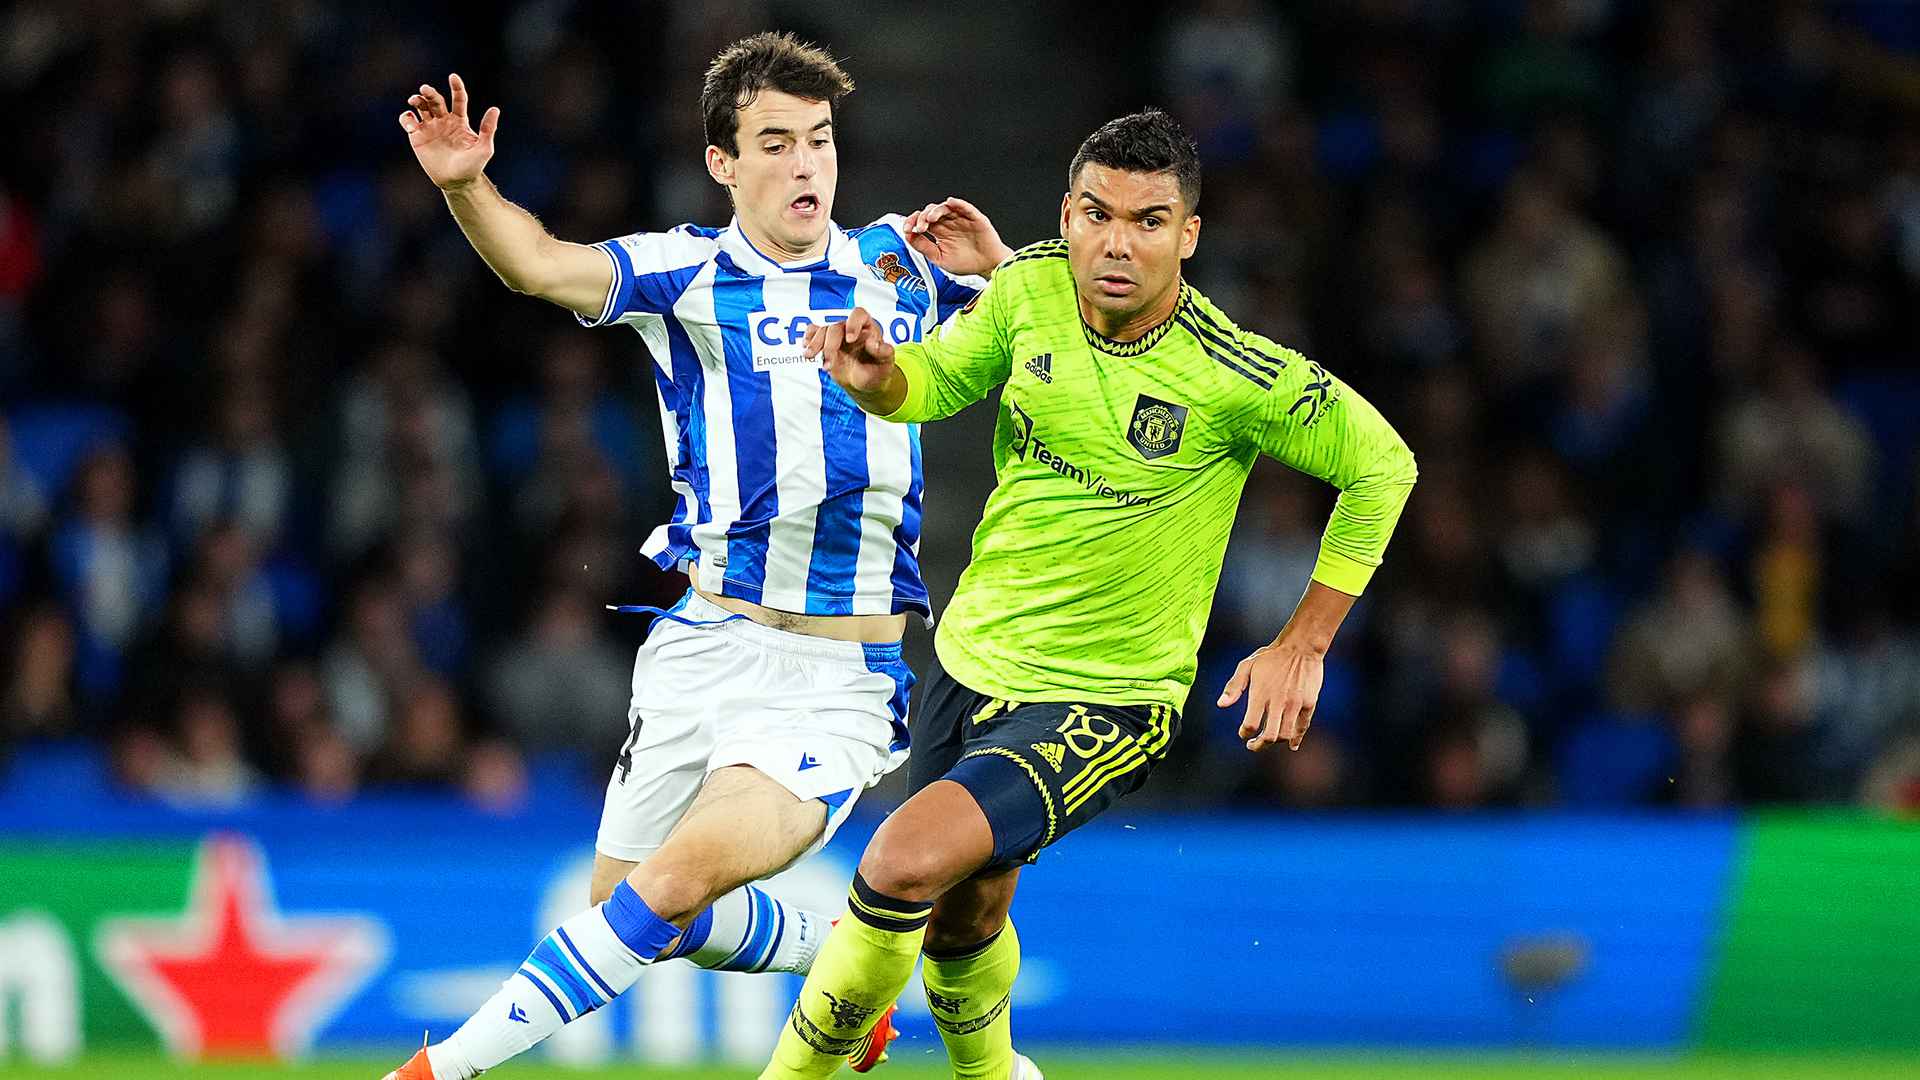 Real Sociedad 0 Manchester United 1